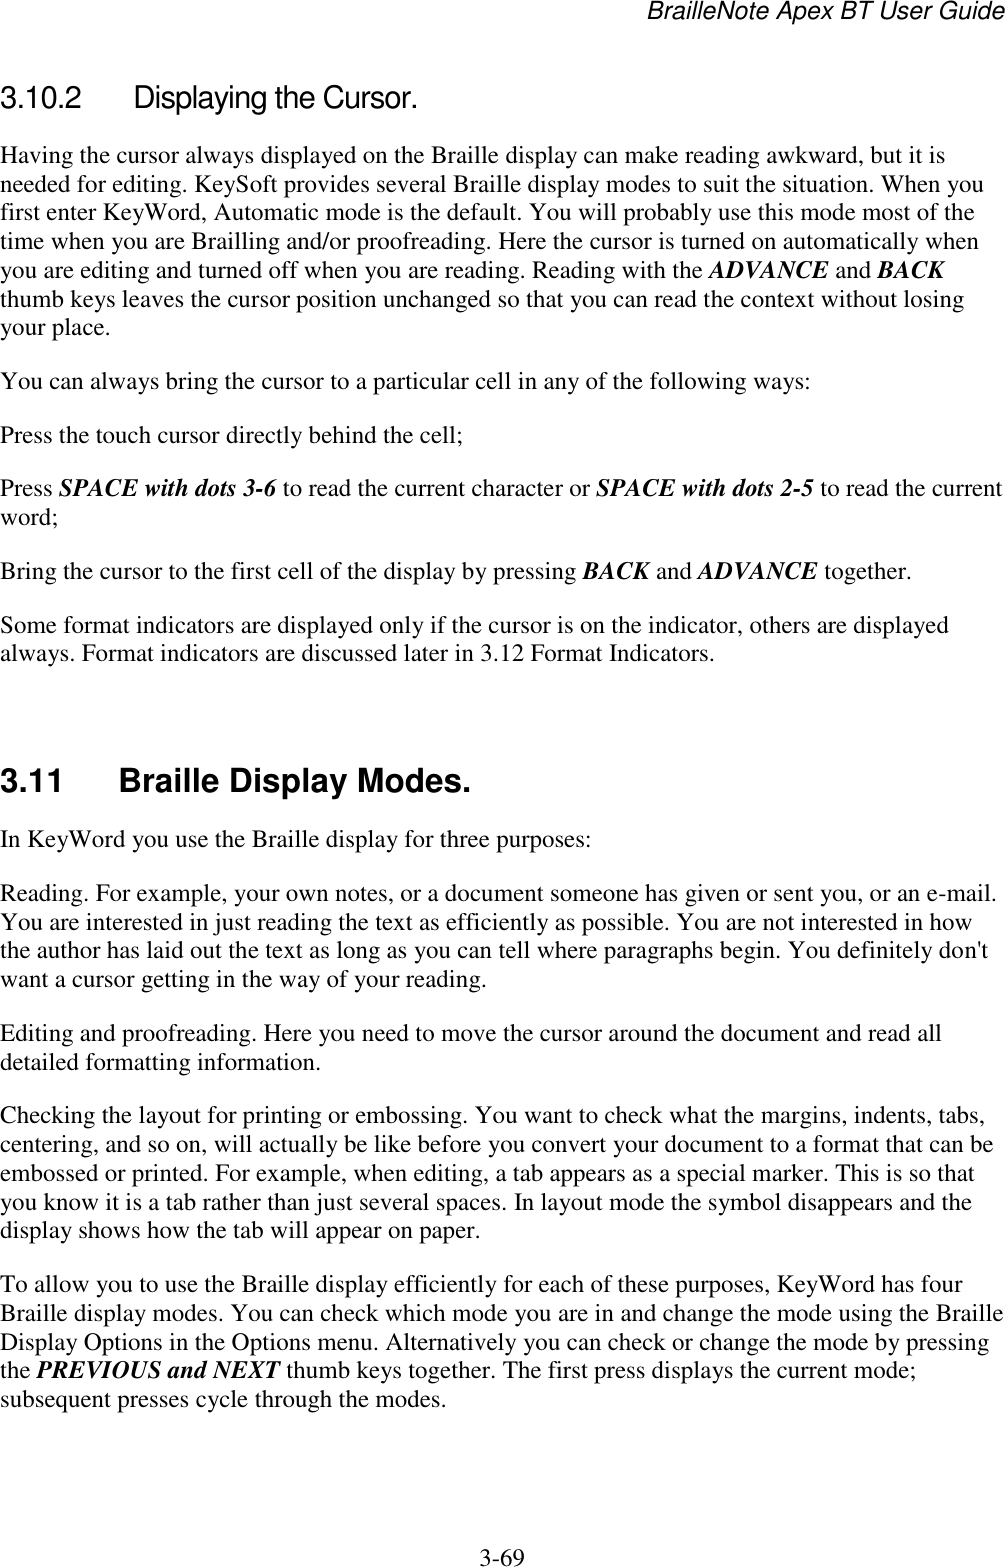 BrailleNote Apex BT User Guide   3-69   3.10.2  Displaying the Cursor. Having the cursor always displayed on the Braille display can make reading awkward, but it is needed for editing. KeySoft provides several Braille display modes to suit the situation. When you first enter KeyWord, Automatic mode is the default. You will probably use this mode most of the time when you are Brailling and/or proofreading. Here the cursor is turned on automatically when you are editing and turned off when you are reading. Reading with the ADVANCE and BACK thumb keys leaves the cursor position unchanged so that you can read the context without losing your place. You can always bring the cursor to a particular cell in any of the following ways: Press the touch cursor directly behind the cell; Press SPACE with dots 3-6 to read the current character or SPACE with dots 2-5 to read the current word; Bring the cursor to the first cell of the display by pressing BACK and ADVANCE together. Some format indicators are displayed only if the cursor is on the indicator, others are displayed always. Format indicators are discussed later in 3.12 Format Indicators.   3.11  Braille Display Modes. In KeyWord you use the Braille display for three purposes: Reading. For example, your own notes, or a document someone has given or sent you, or an e-mail. You are interested in just reading the text as efficiently as possible. You are not interested in how the author has laid out the text as long as you can tell where paragraphs begin. You definitely don&apos;t want a cursor getting in the way of your reading. Editing and proofreading. Here you need to move the cursor around the document and read all detailed formatting information. Checking the layout for printing or embossing. You want to check what the margins, indents, tabs, centering, and so on, will actually be like before you convert your document to a format that can be embossed or printed. For example, when editing, a tab appears as a special marker. This is so that you know it is a tab rather than just several spaces. In layout mode the symbol disappears and the display shows how the tab will appear on paper. To allow you to use the Braille display efficiently for each of these purposes, KeyWord has four Braille display modes. You can check which mode you are in and change the mode using the Braille Display Options in the Options menu. Alternatively you can check or change the mode by pressing the PREVIOUS and NEXT thumb keys together. The first press displays the current mode; subsequent presses cycle through the modes.   